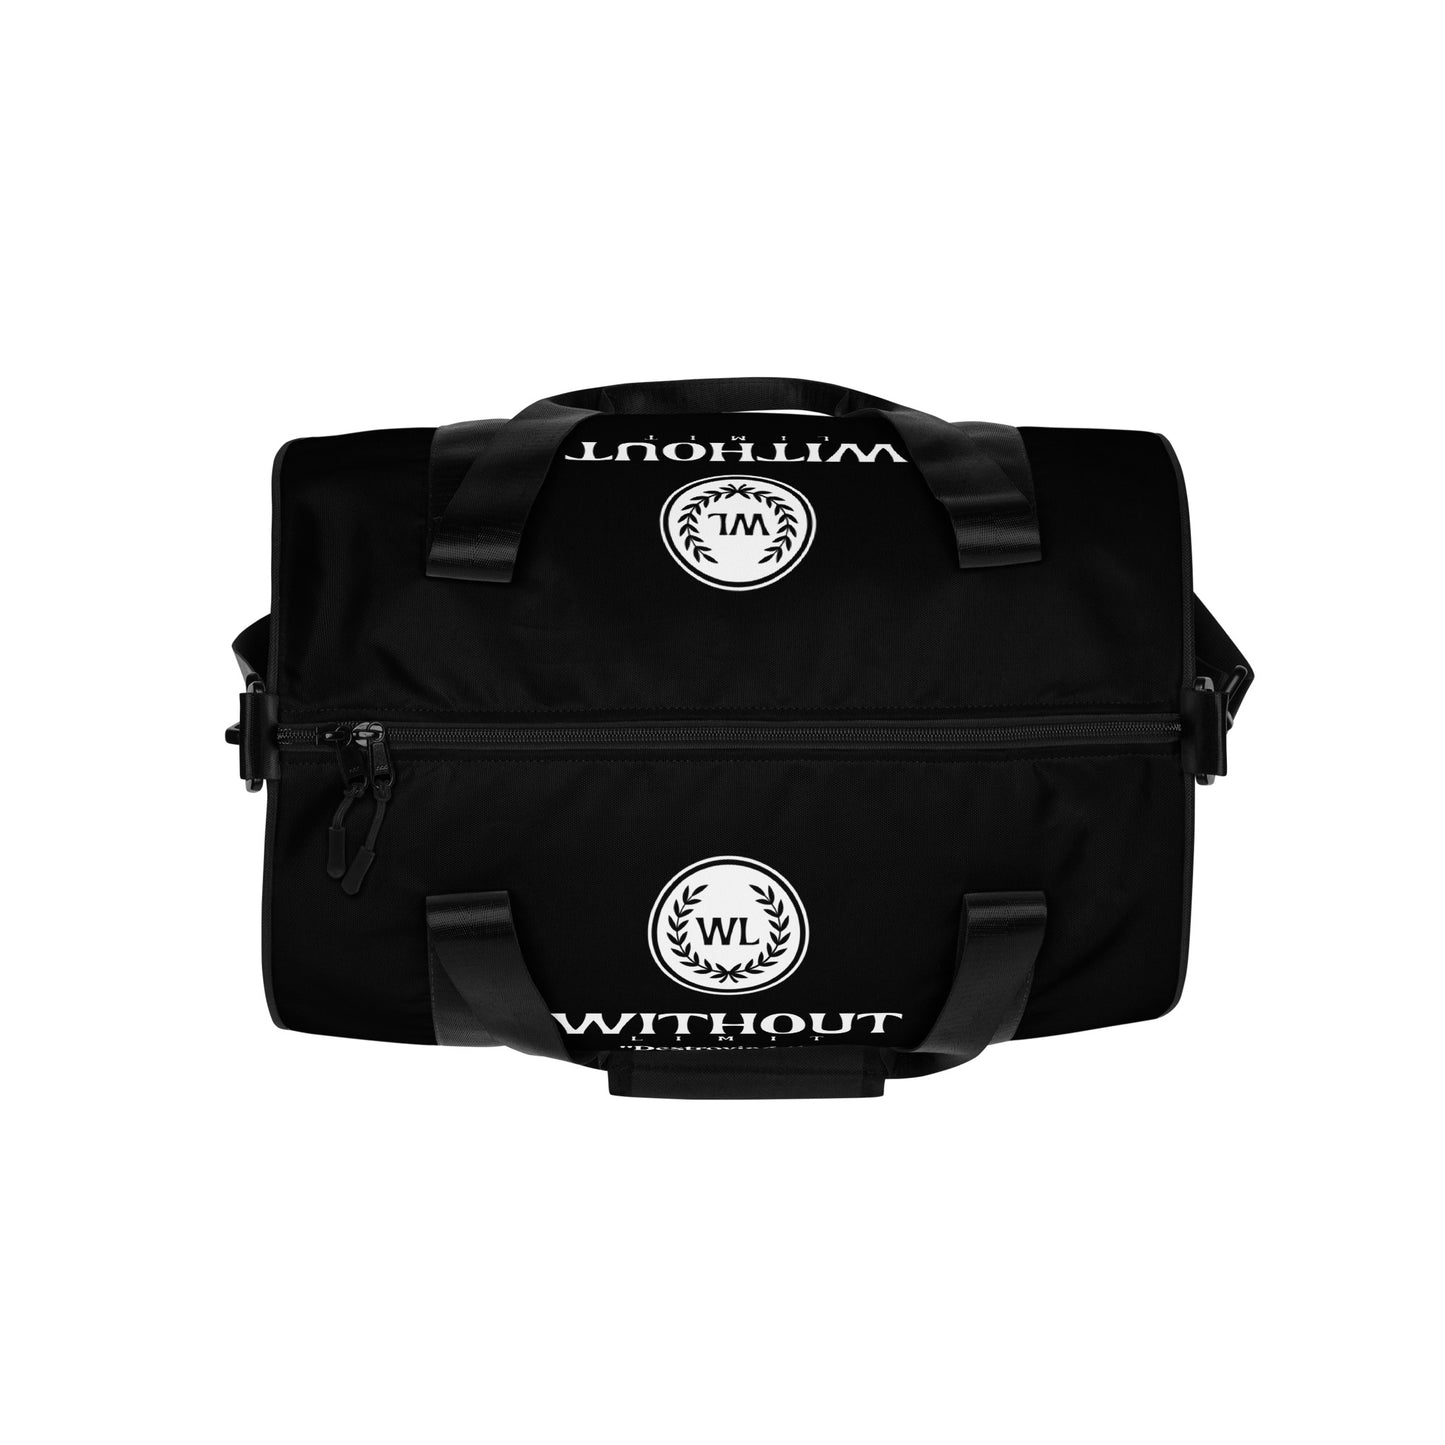 Without Limit Gym bag